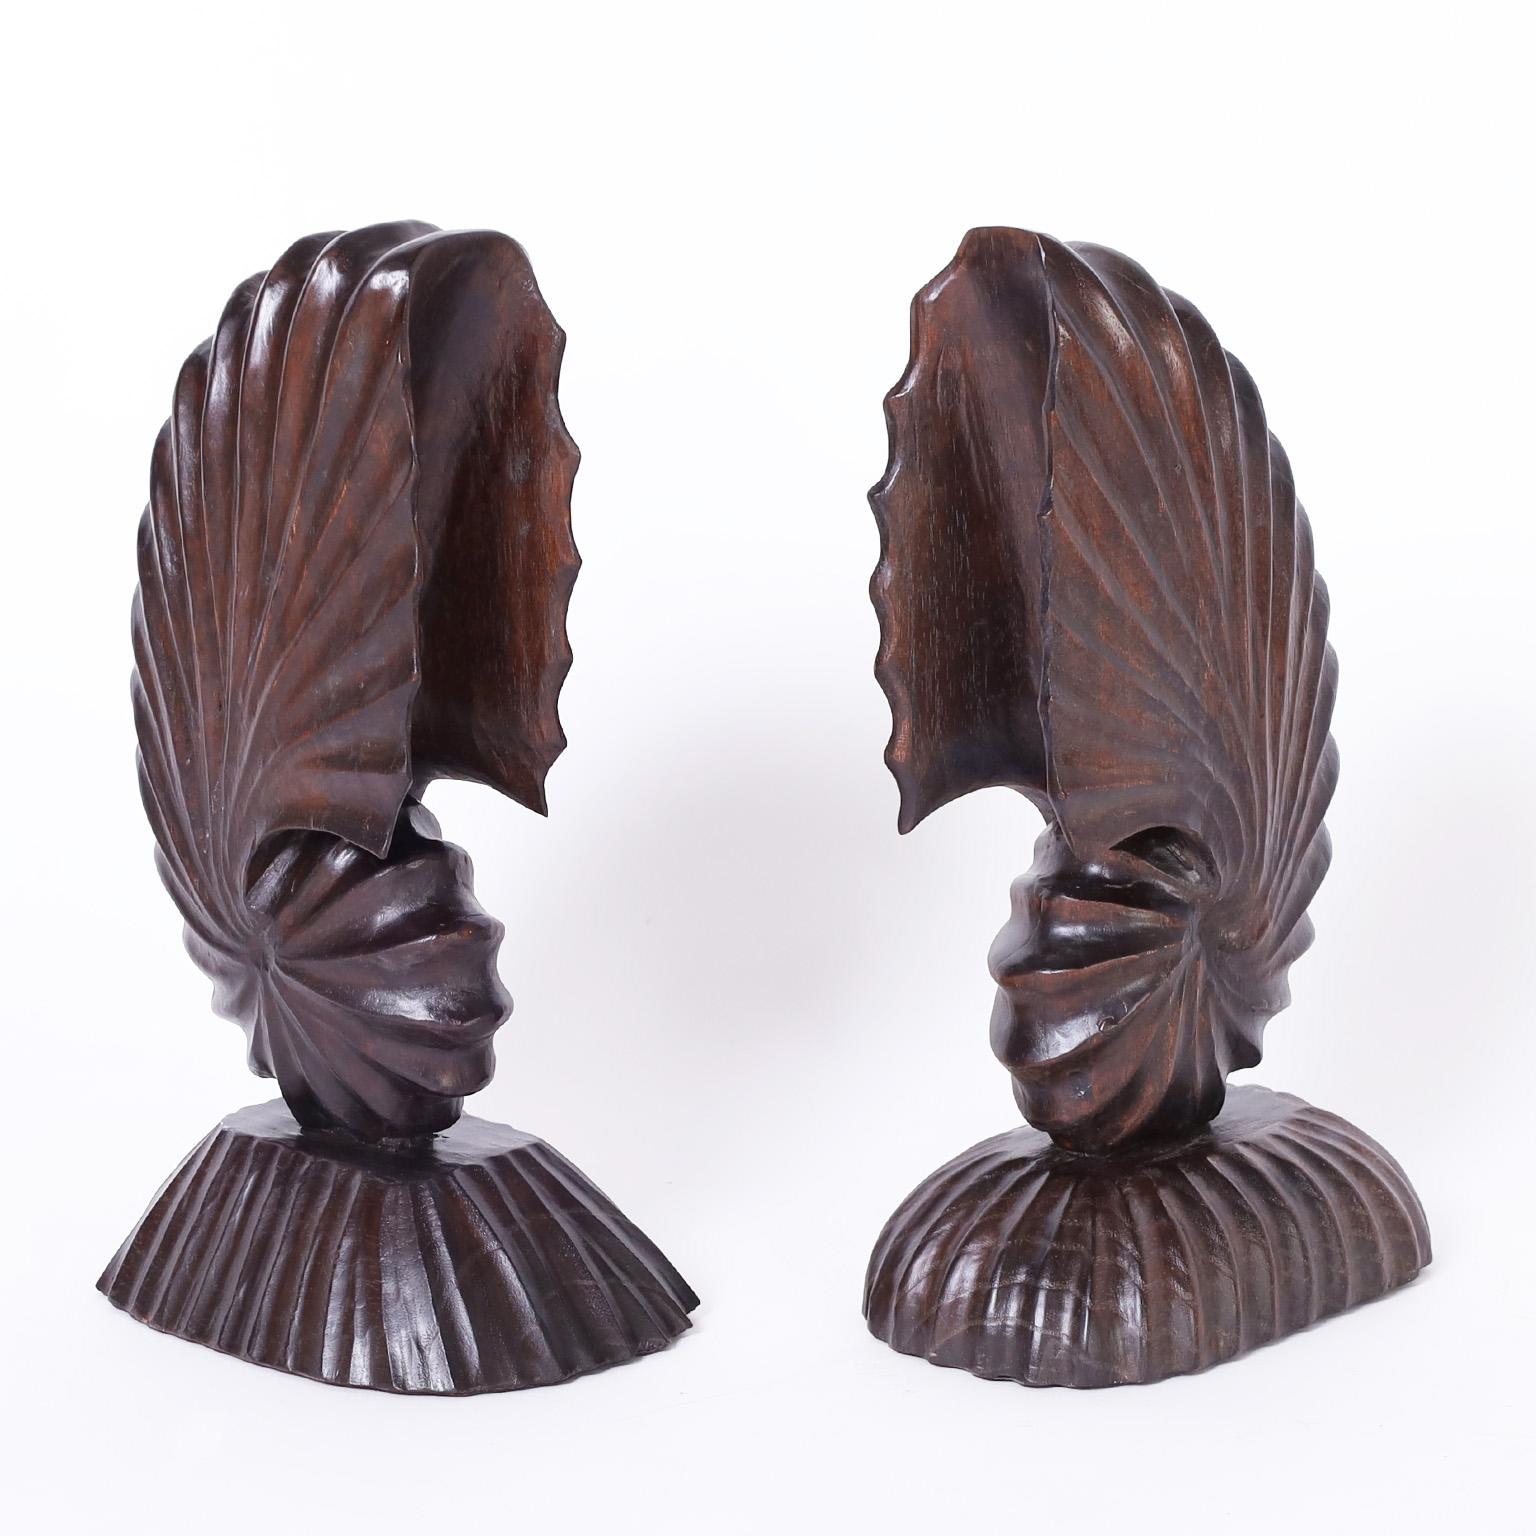 Pair of Carved Wood Nautilus Shells - Modern Sculpture by Unknown